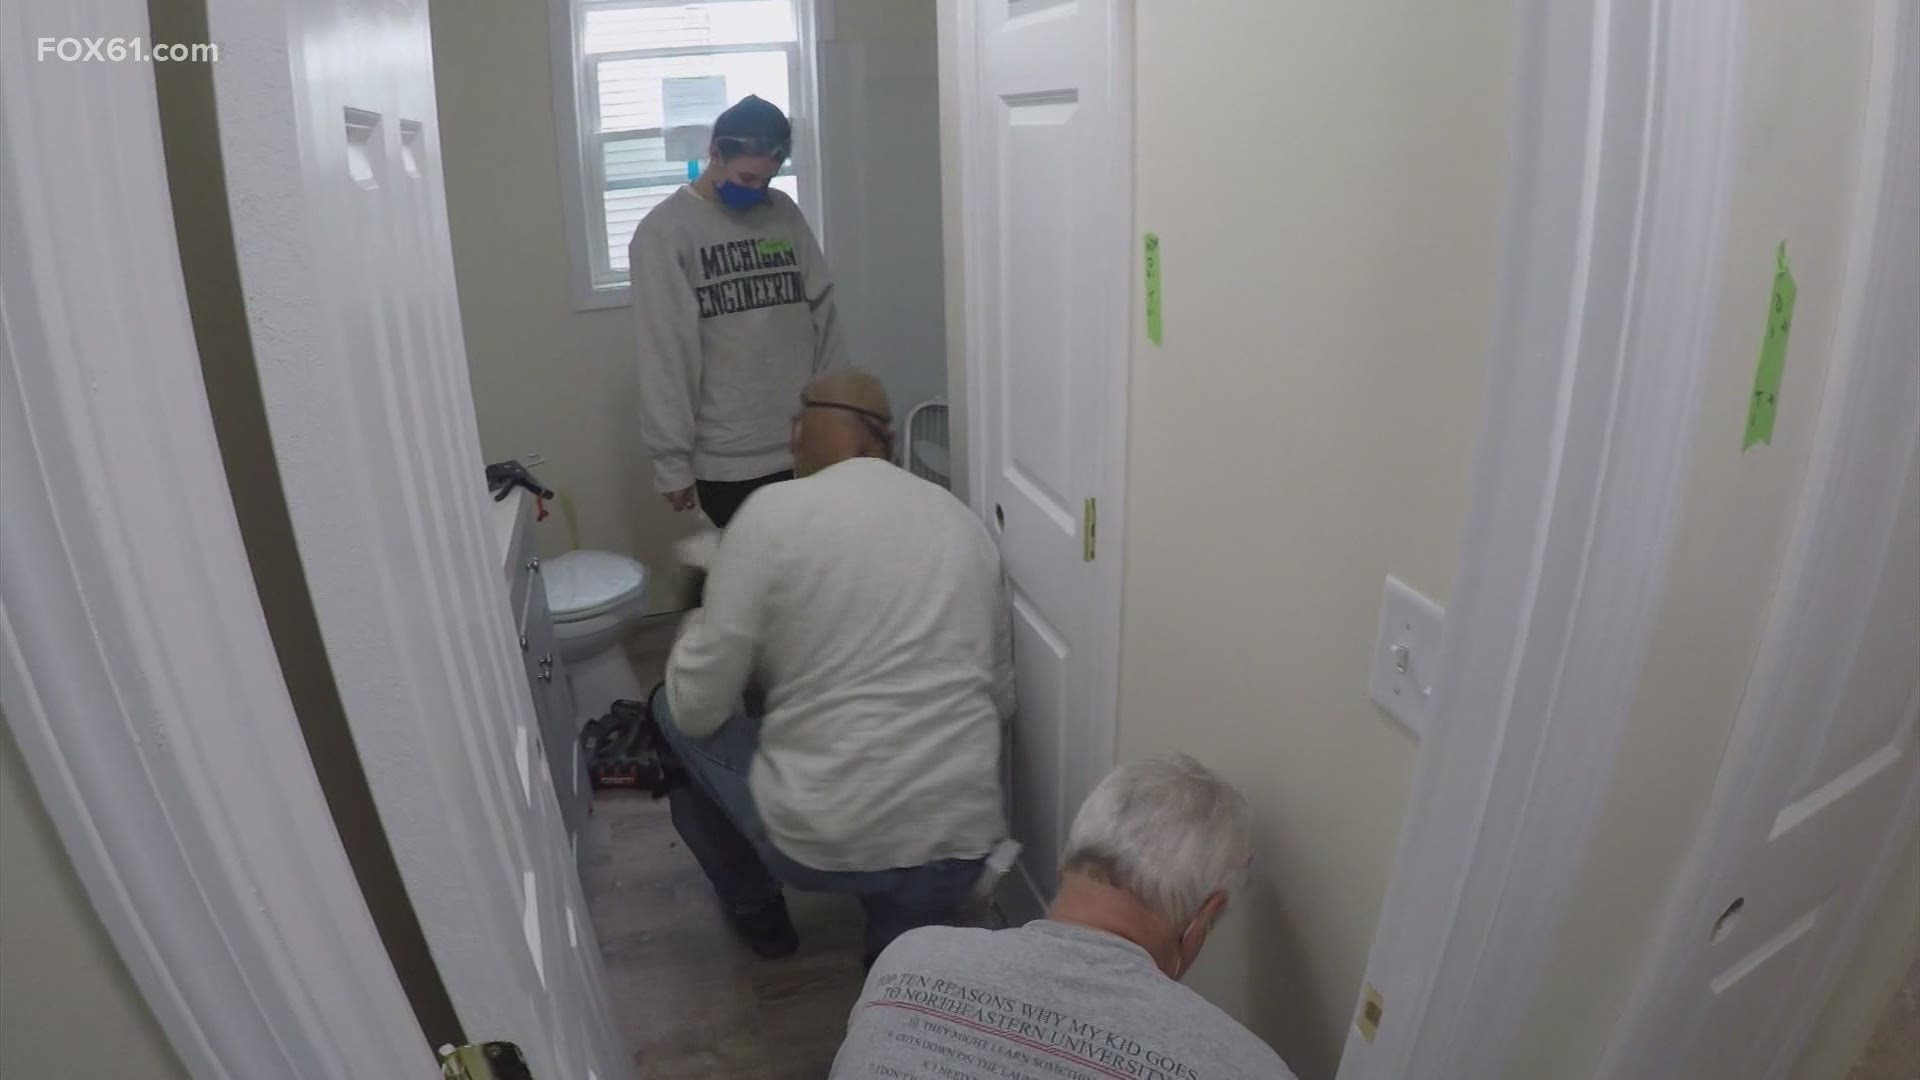 Habitat for Humanity relies 90% on volunteers to get the work done. They’re pushing through COVID-19 with precautions to keep pace with completing 10-12 homes.